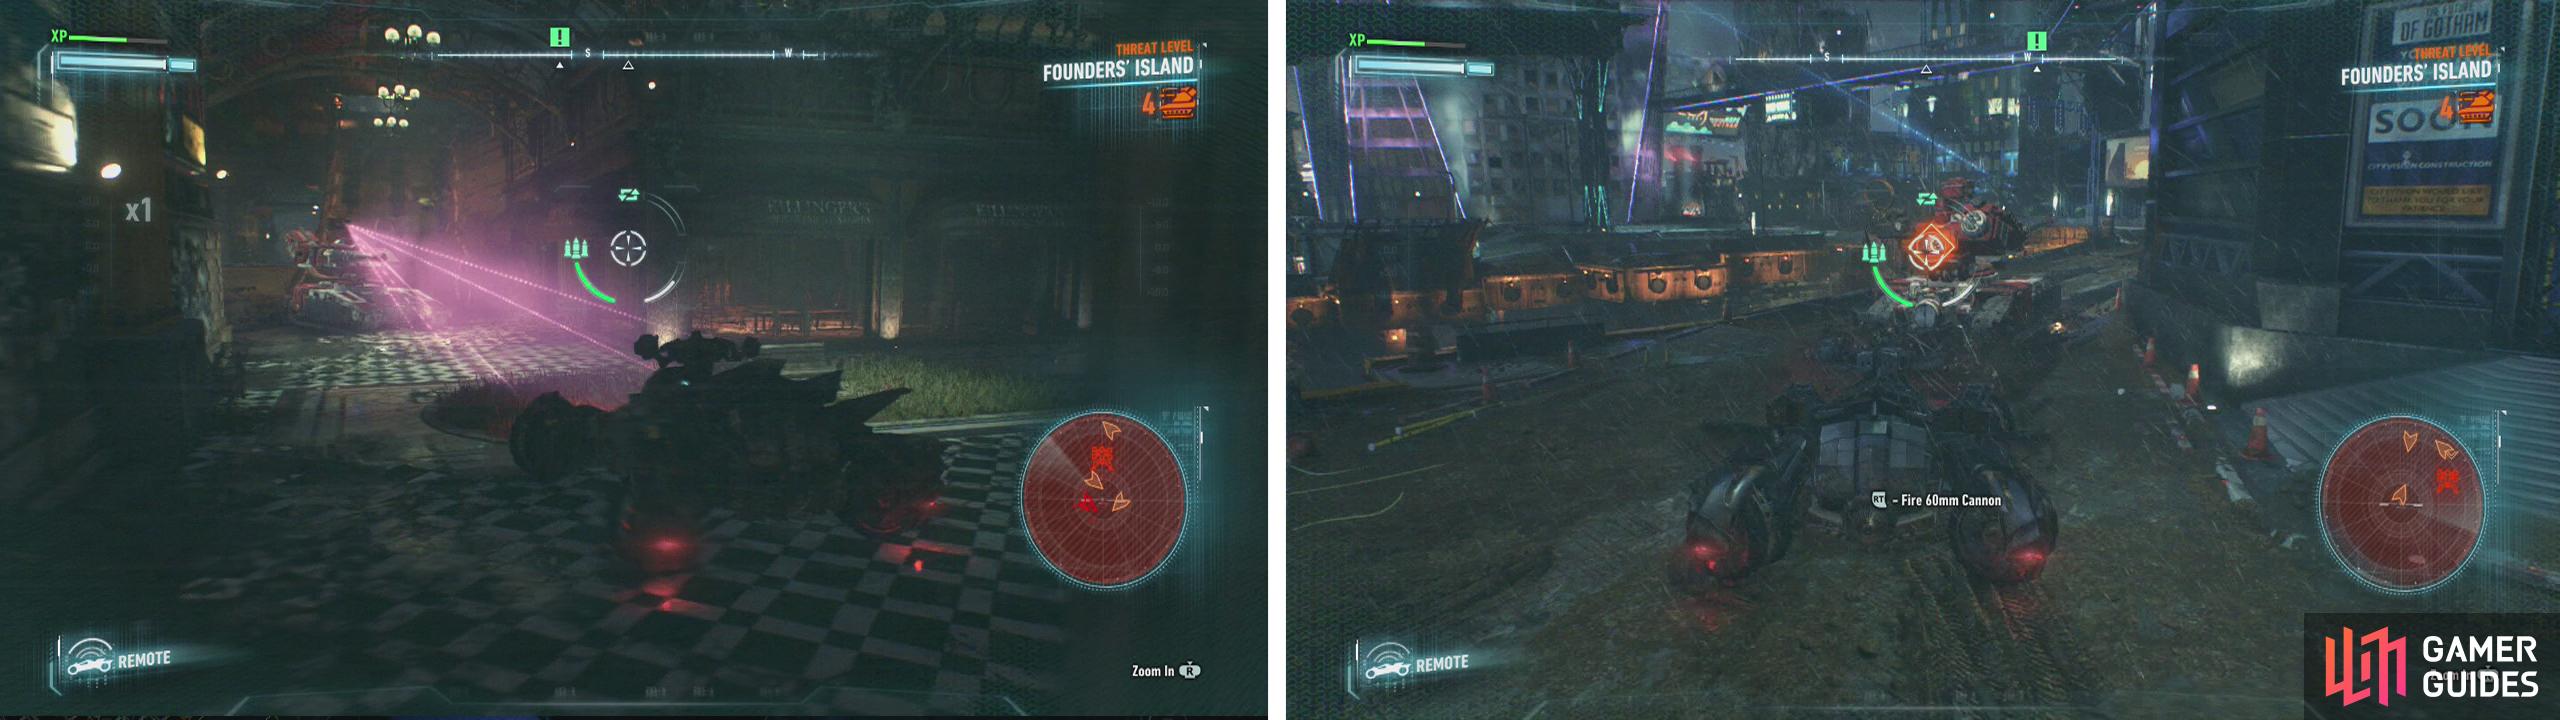 When fighting Cobras avoid the lasers (left) and sneak up to hit them in the rear (right).